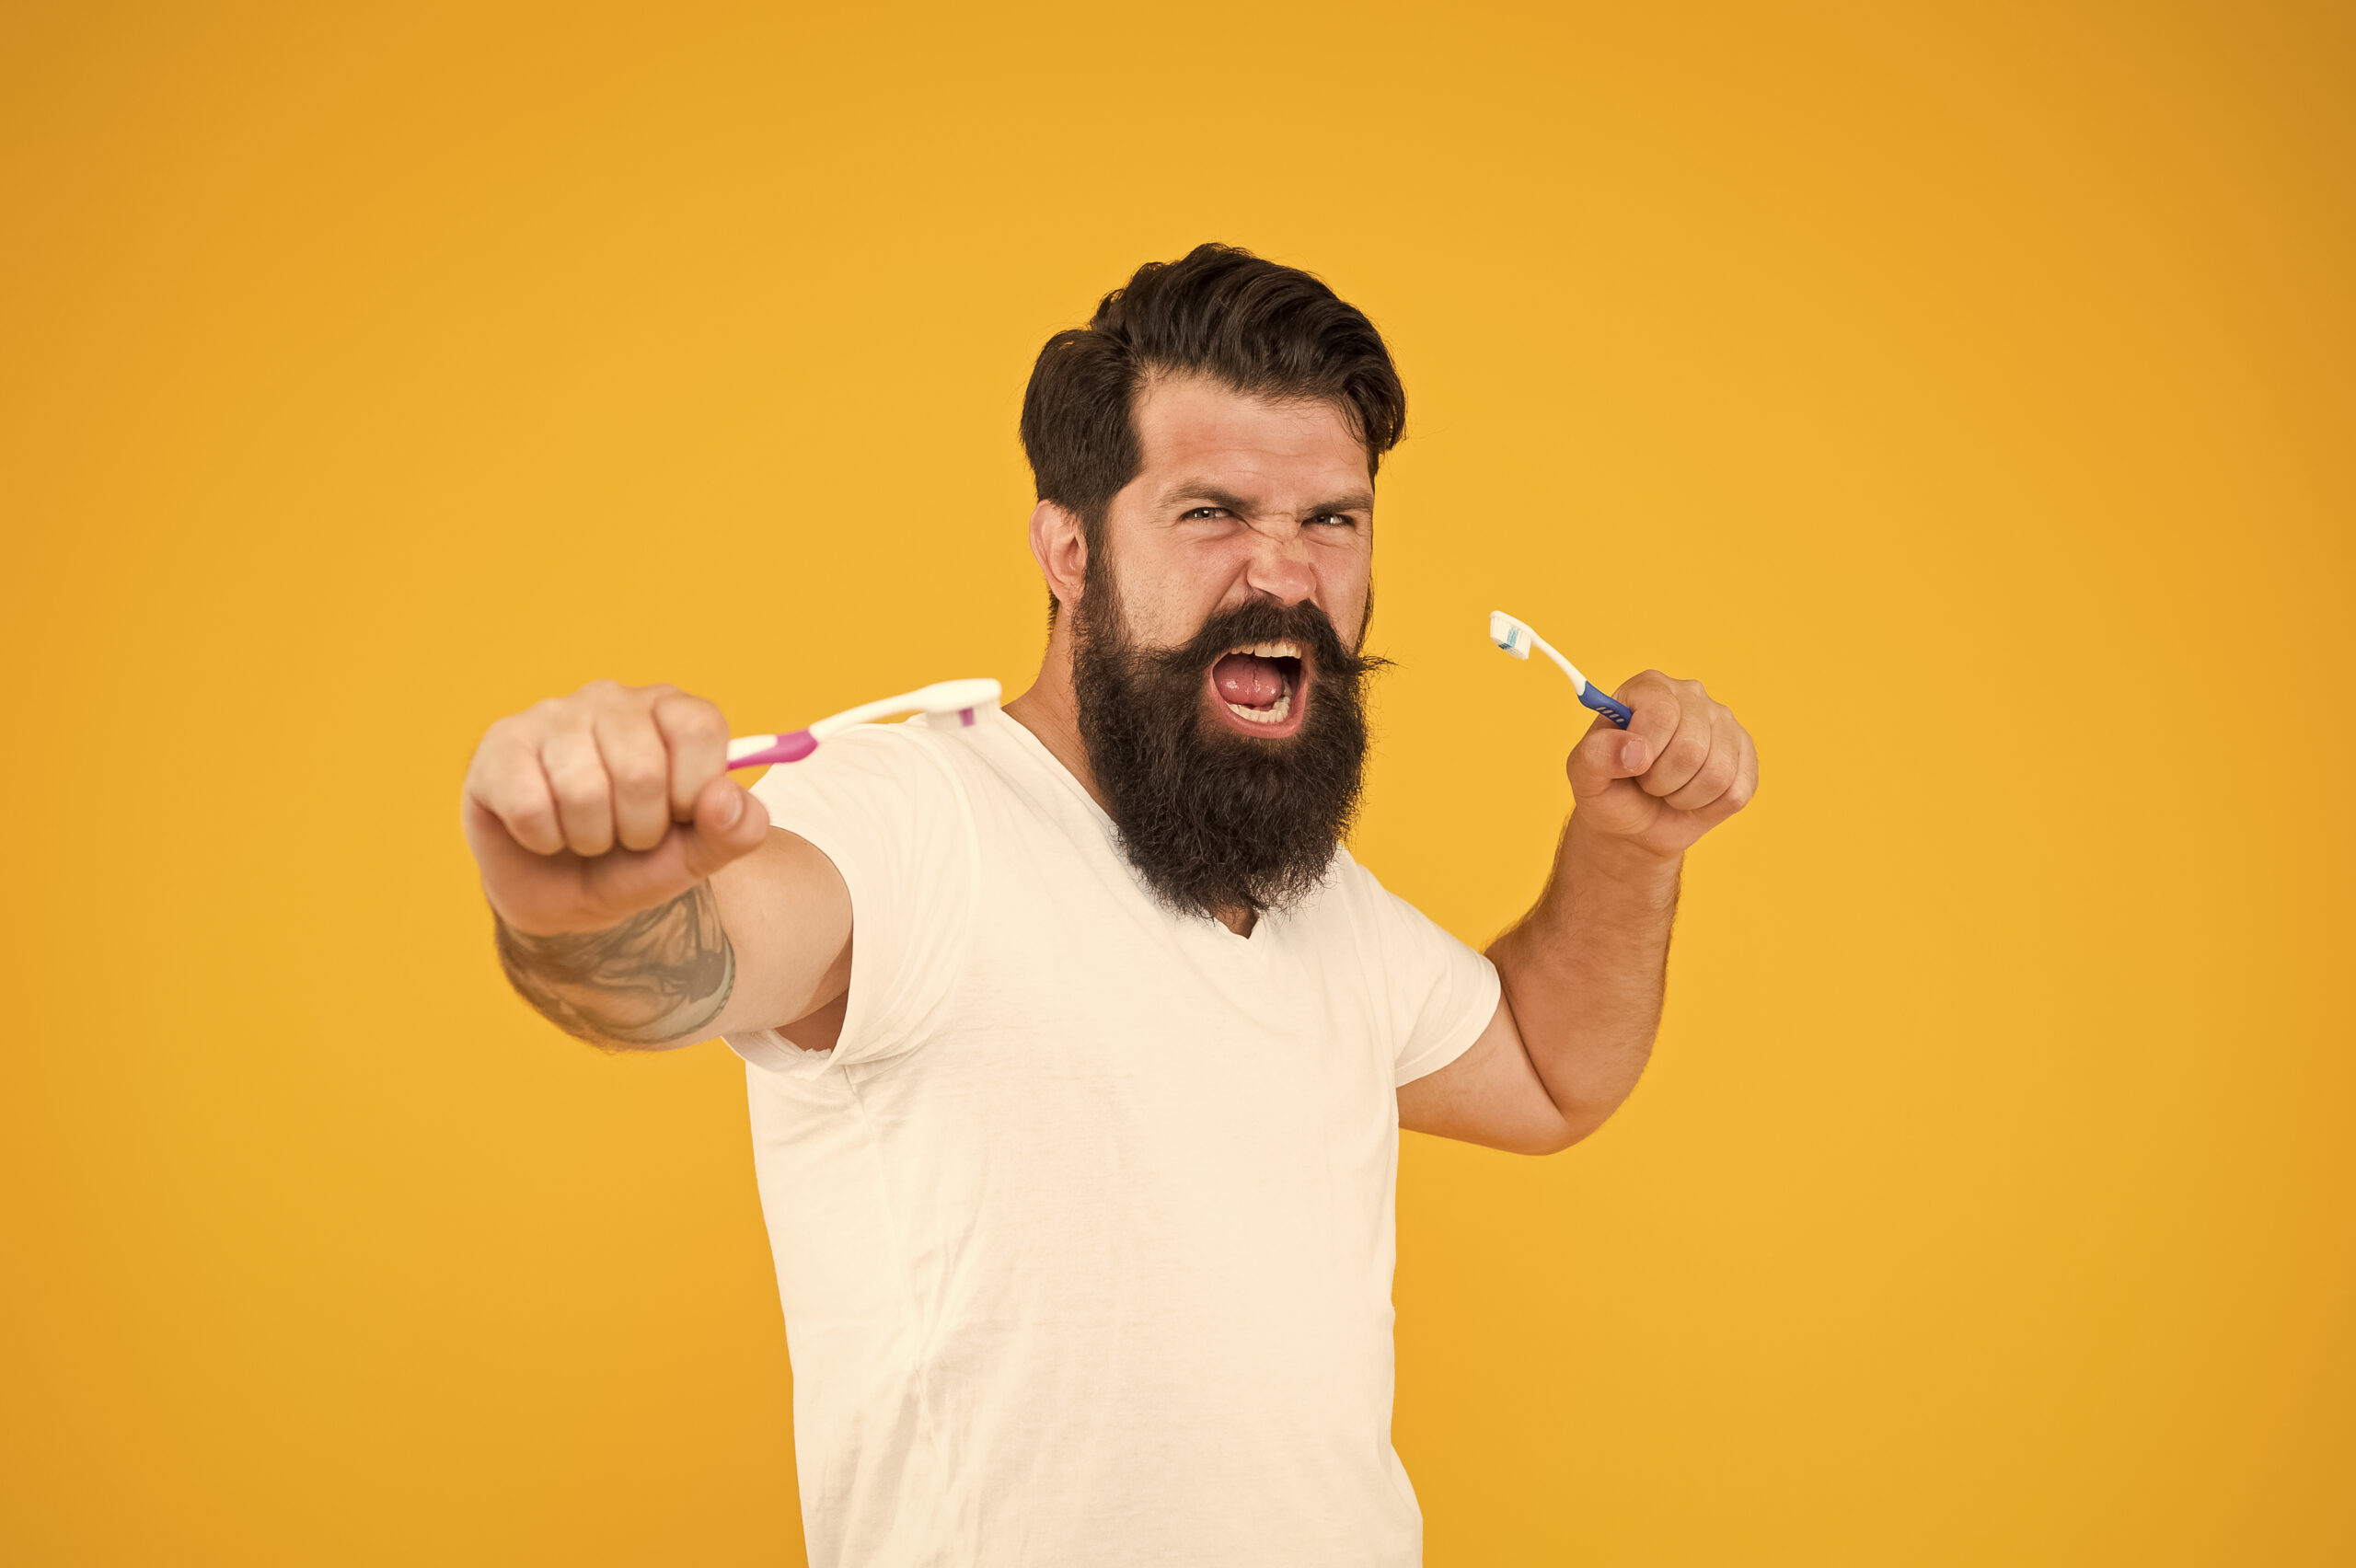 Oral,Care,Never,Looked,Better,.,Bearded,Man,Scream,With